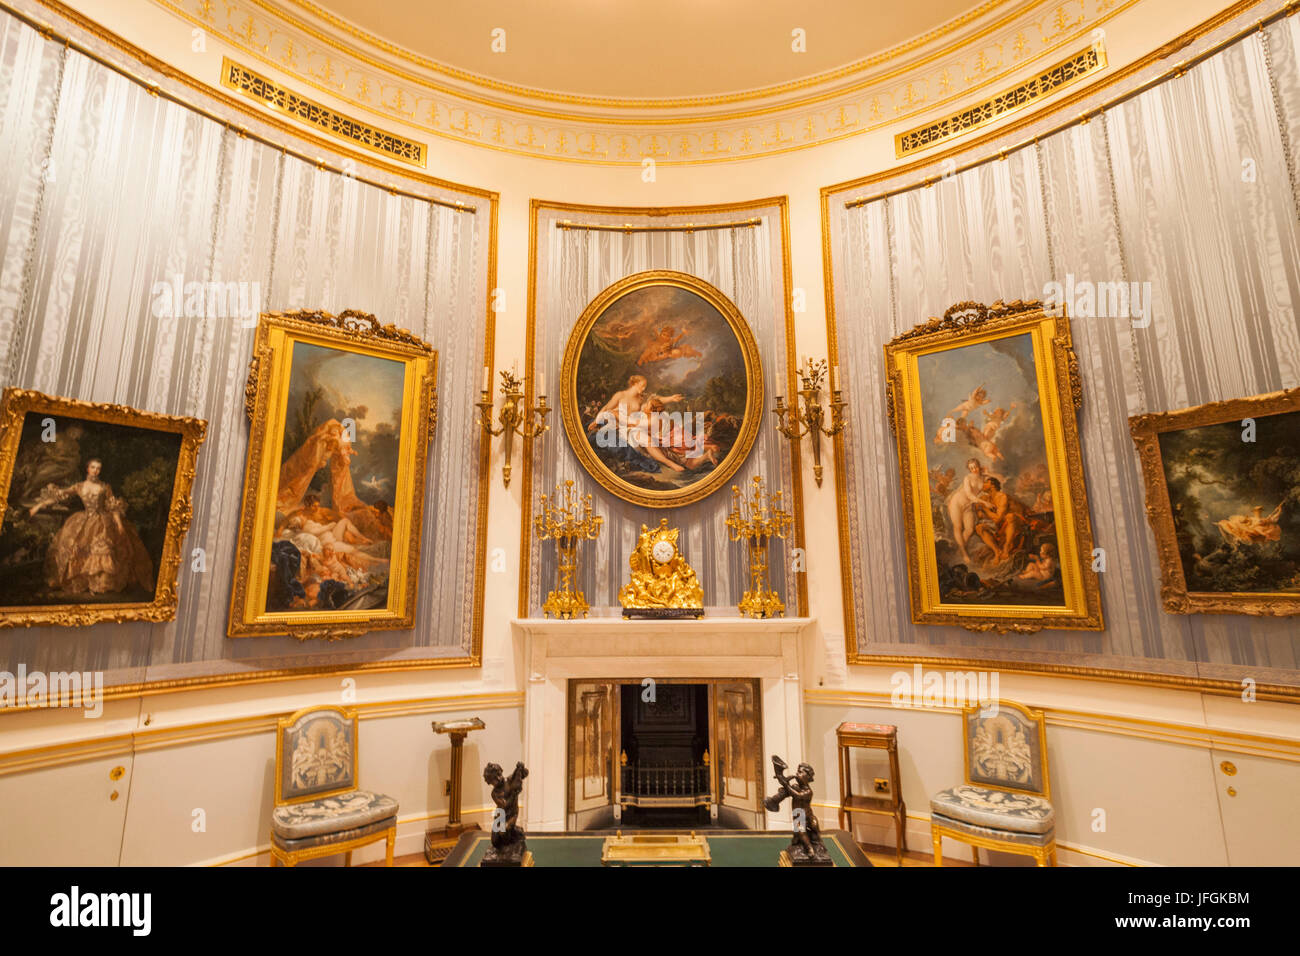 England, London, The Wallace Collection Museum, Interior View Stock Photo